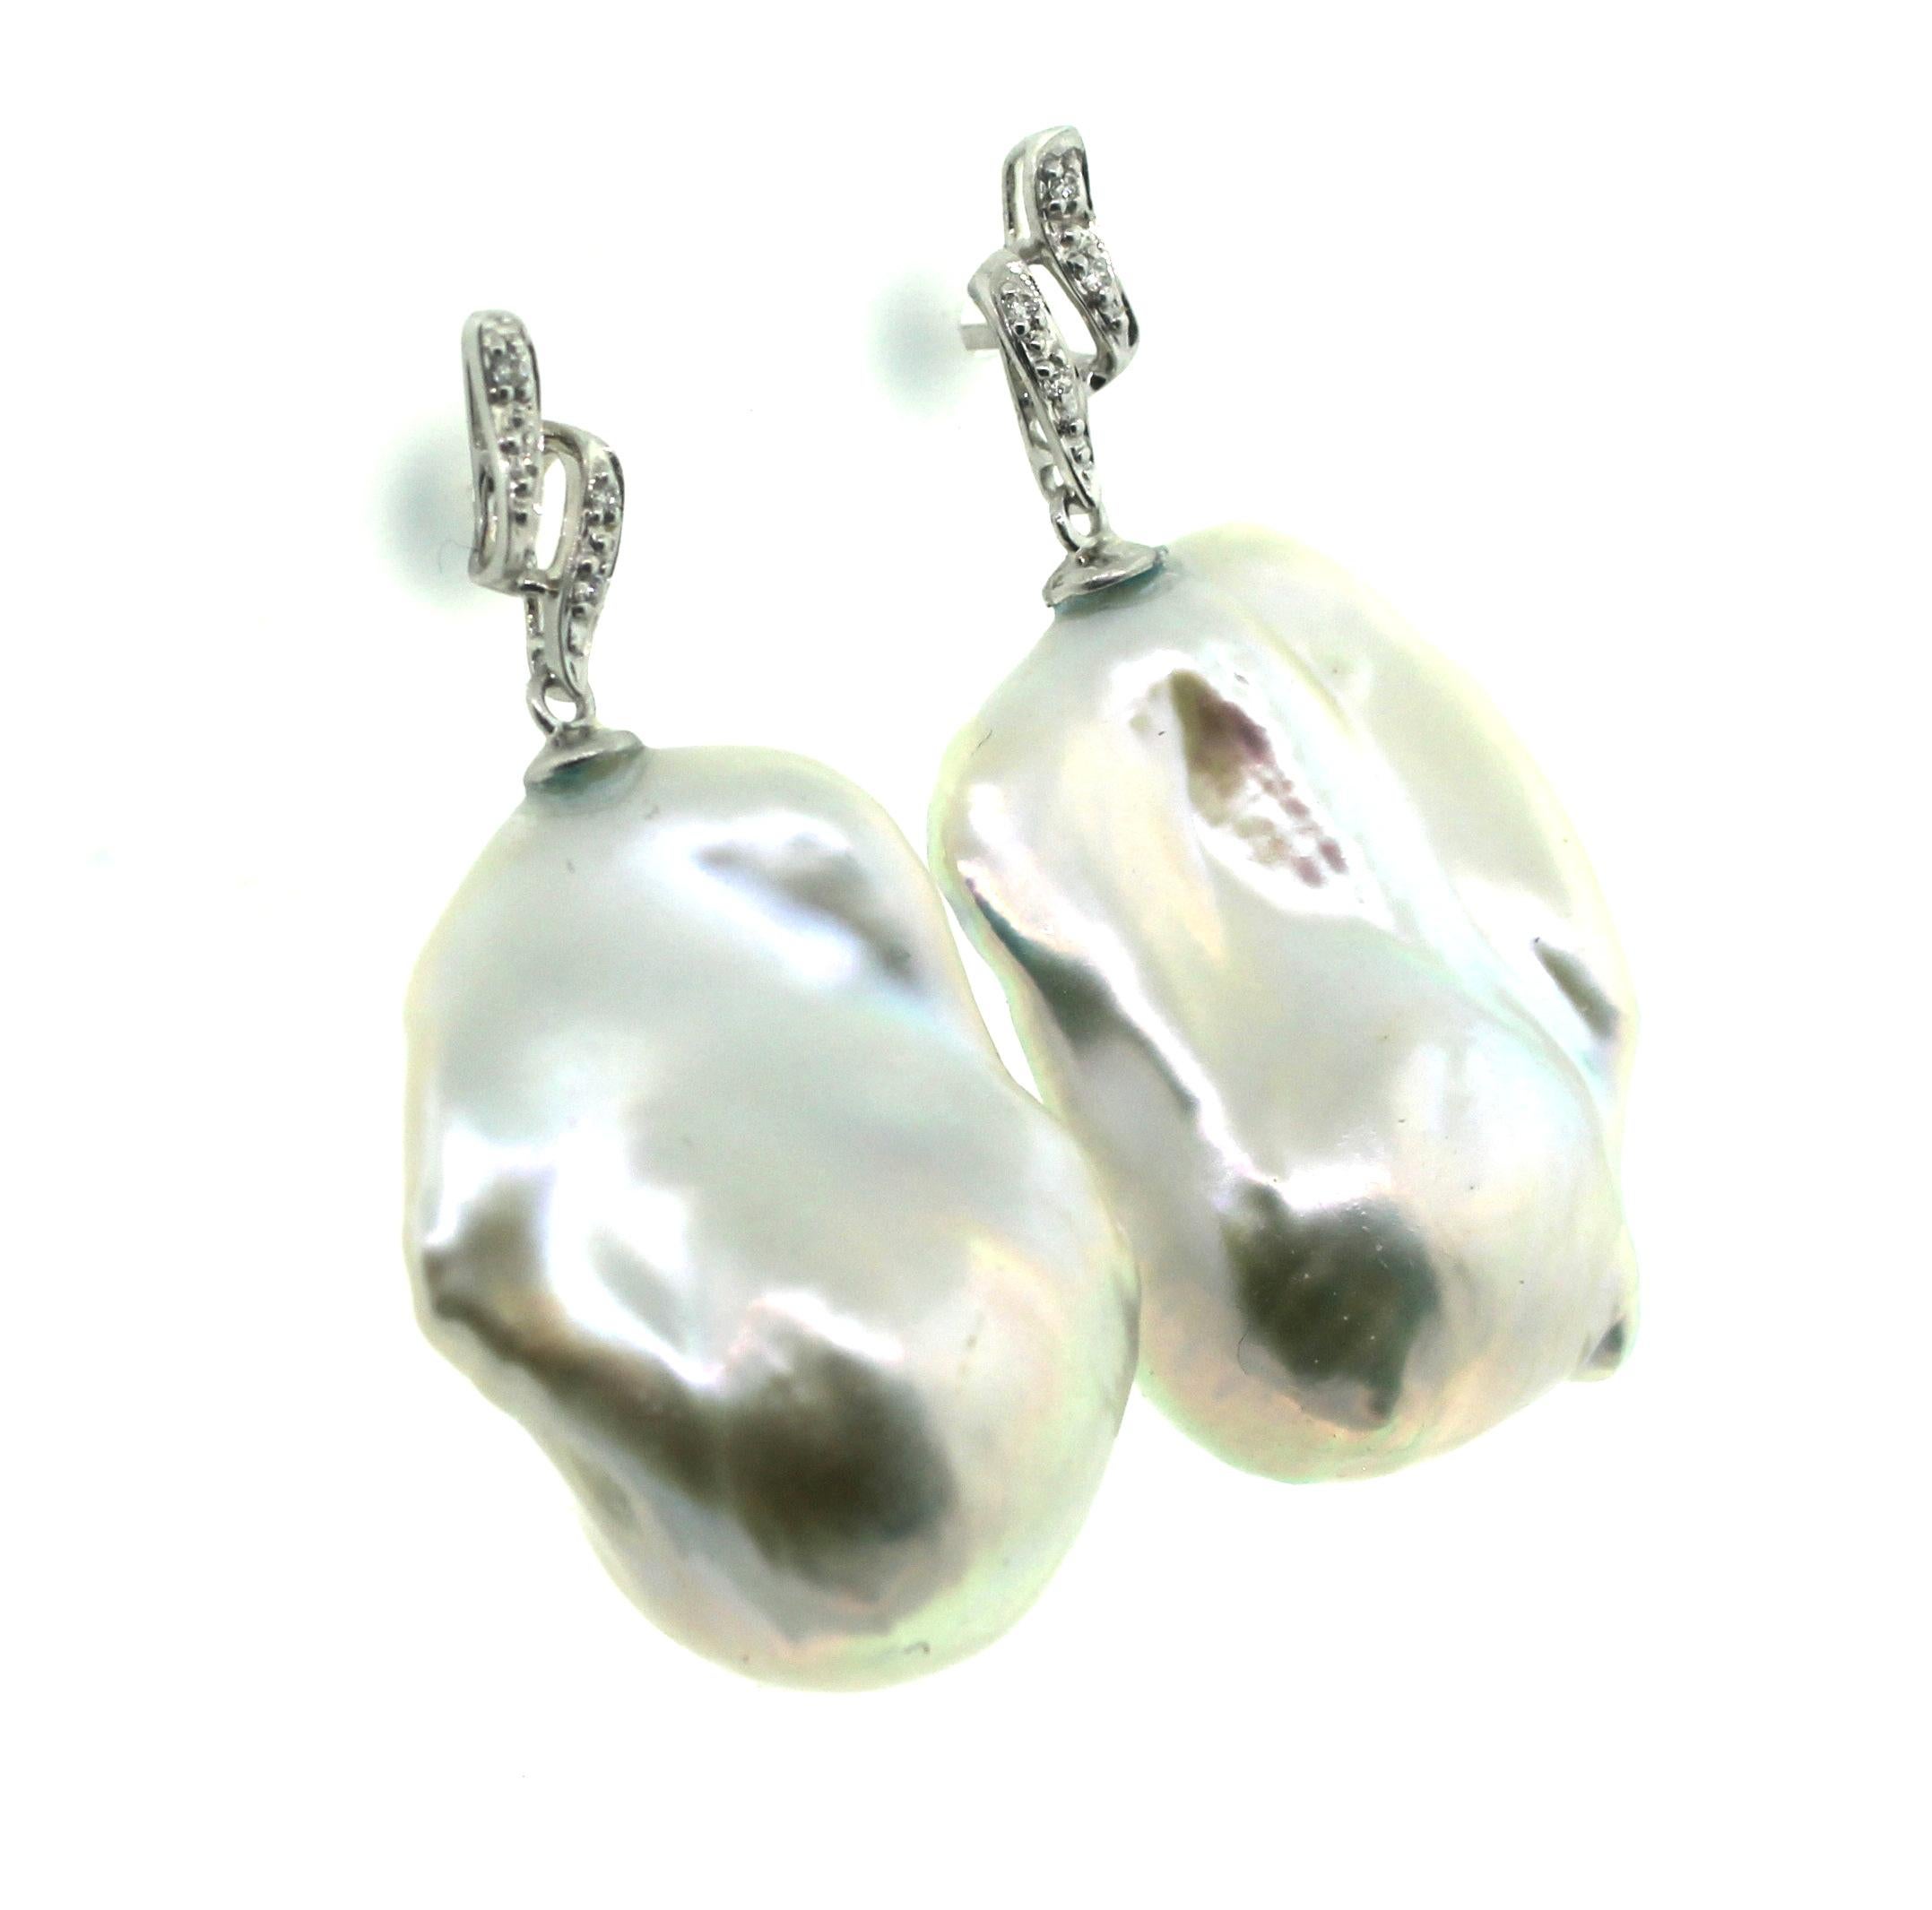 Hakimoto By Jewel Of Ocean
18K White Gold And Diamonds
Total item weight 14.5 grams
25x19 mm Baroque Cultured Pearls
18K White Gold High Polish
Orient: Very Good
Luster: Very Good
Nacre: Very Good